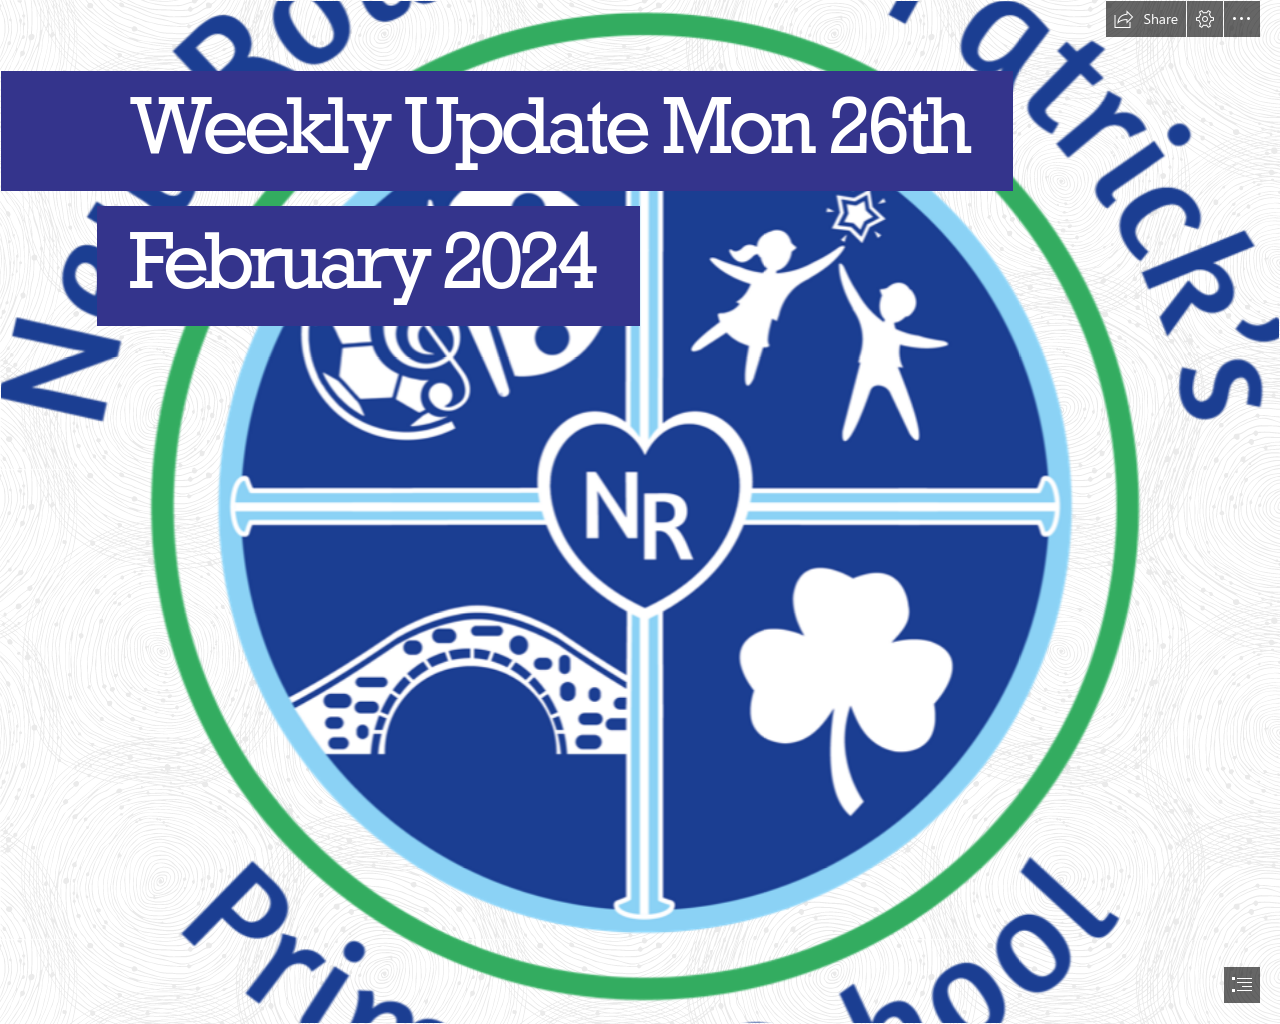 Weekly Update Monday 26th February 2024 